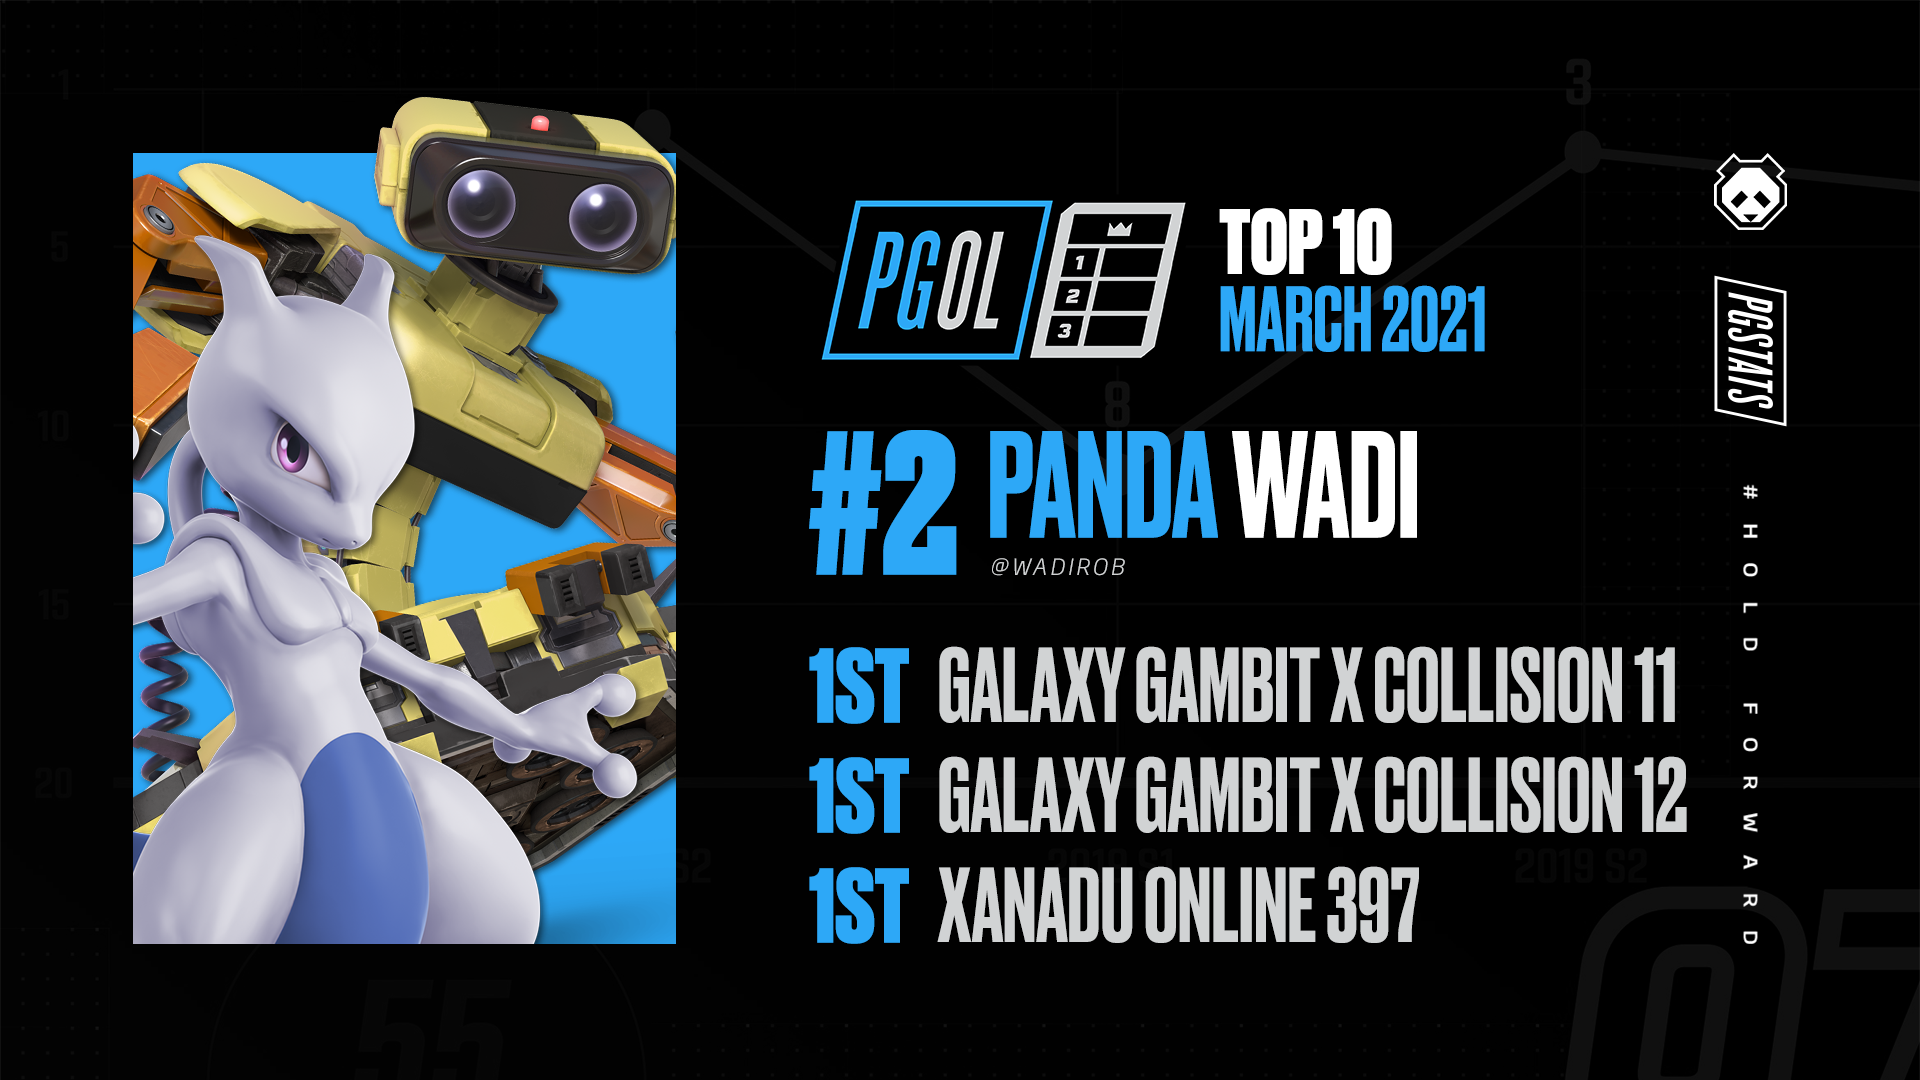 Pgstats Pgol March 21 Jake Vs Wadi Who Comes Out On Top